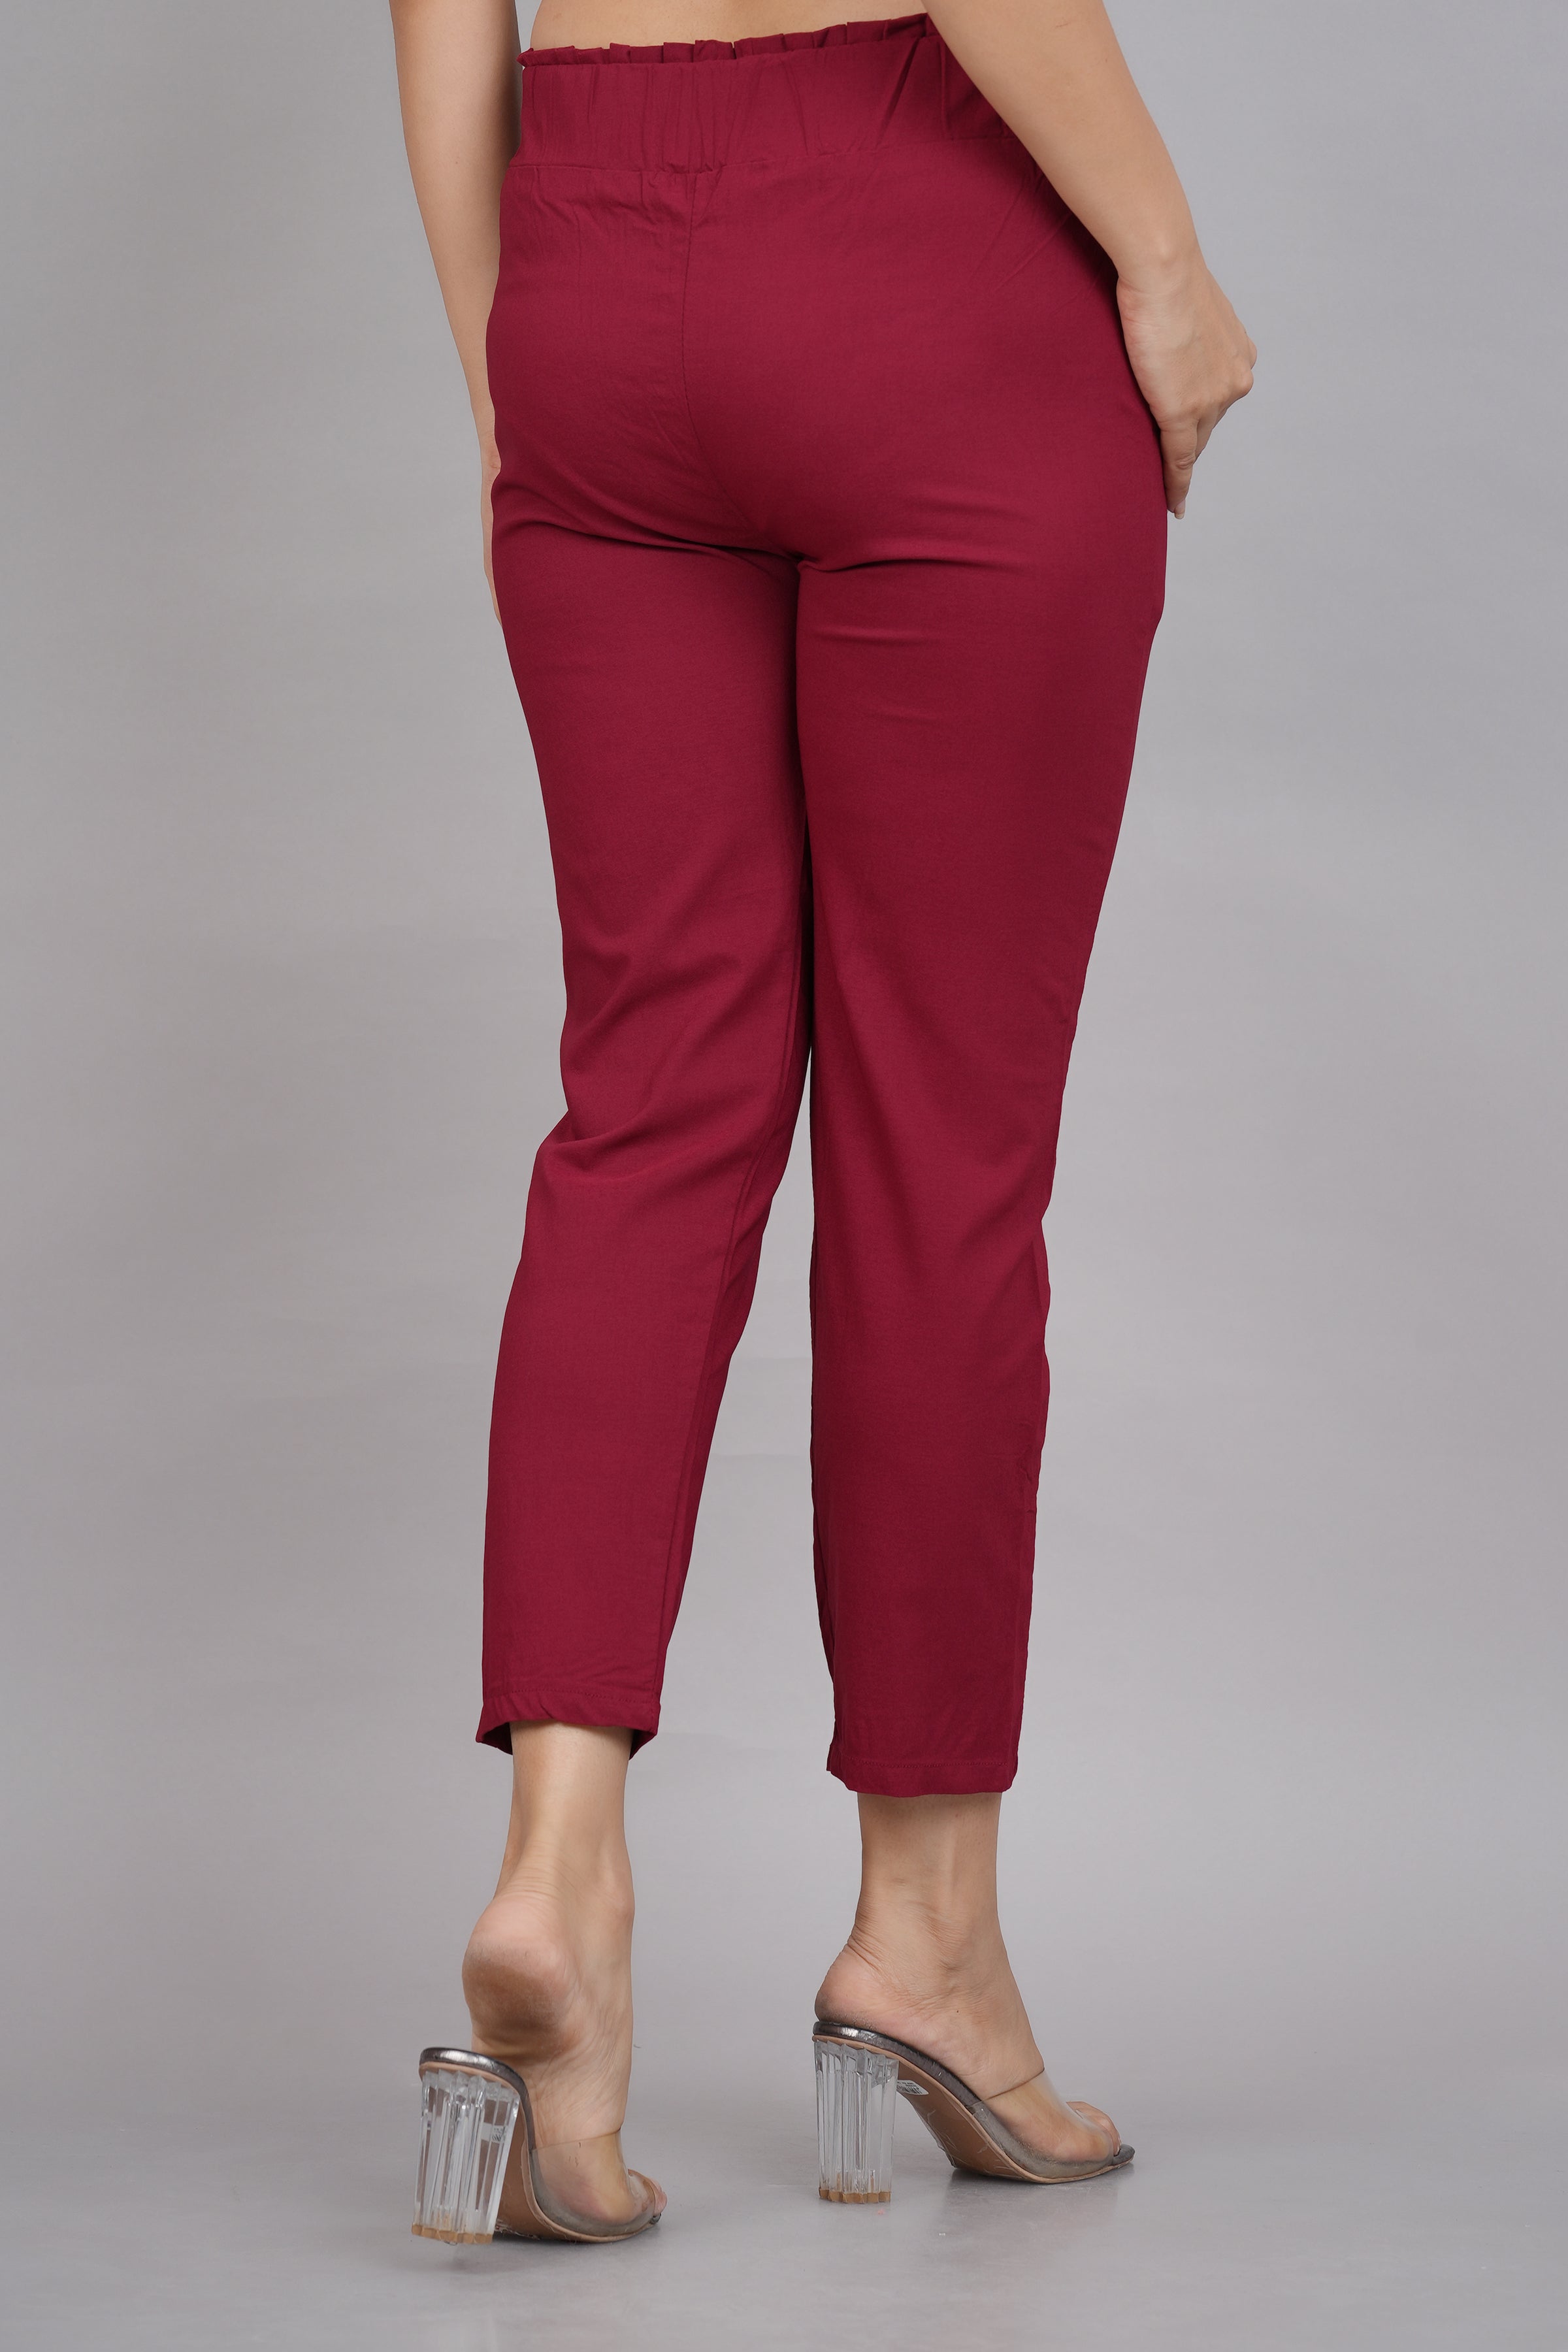 Elegant Maroon Lycra Solid Trousers For Women, गर्ल्स ट्राउज़र - Your Brand  Central, Hyderabad | ID: 2853121250933